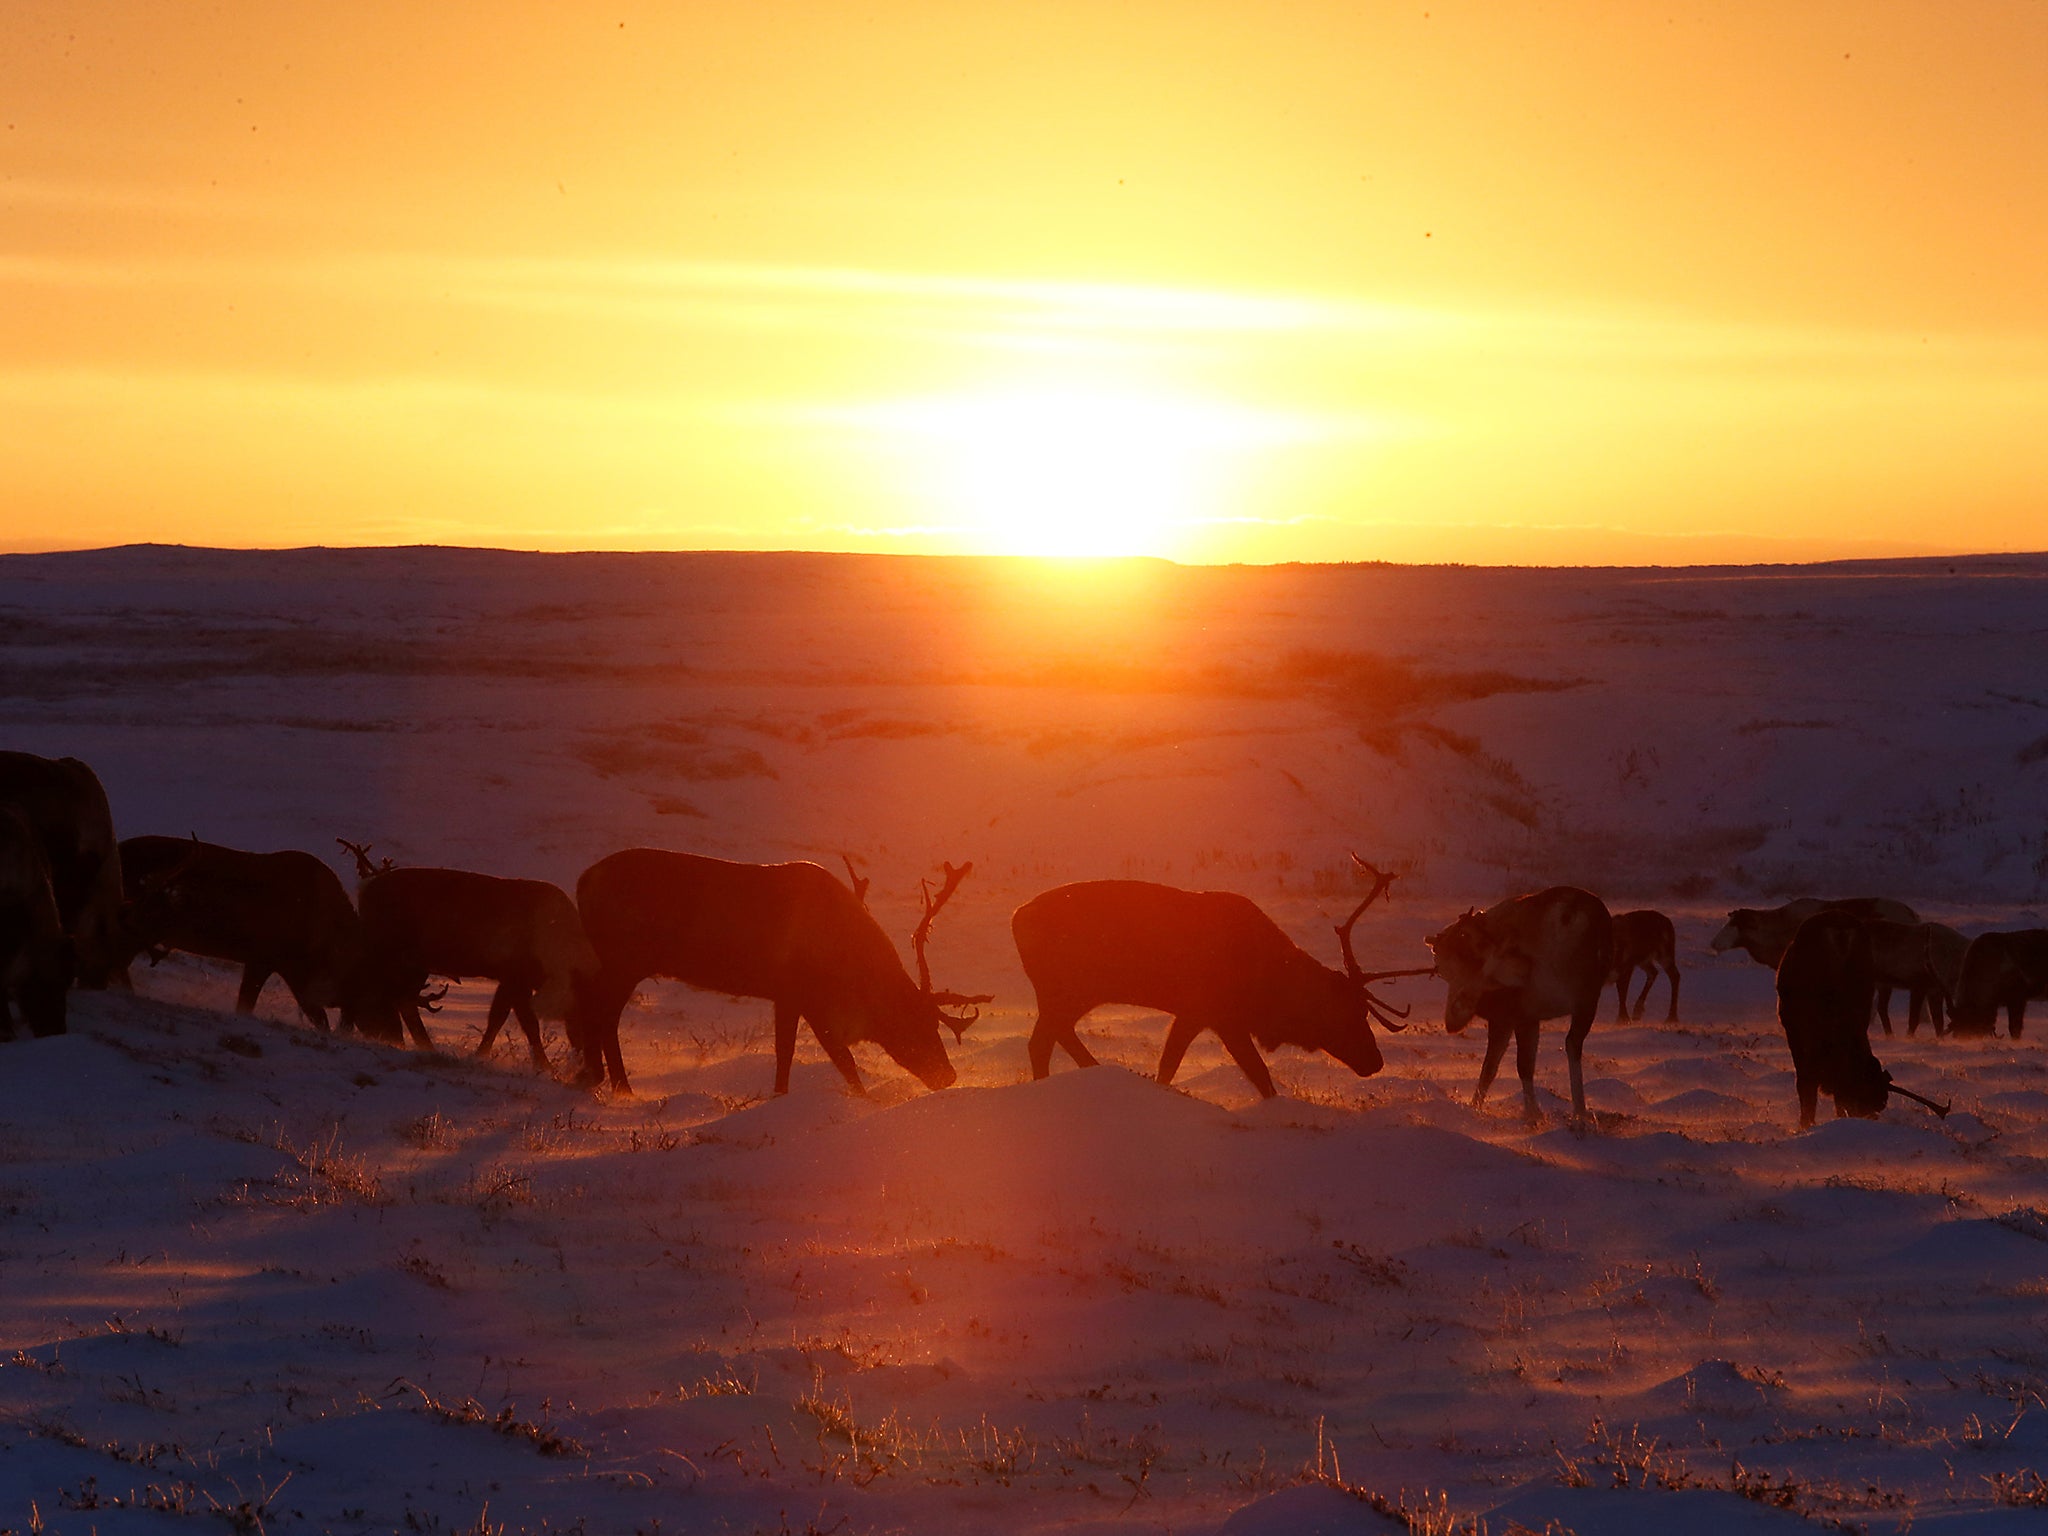 Reindeer graze in the tundra area at sunset